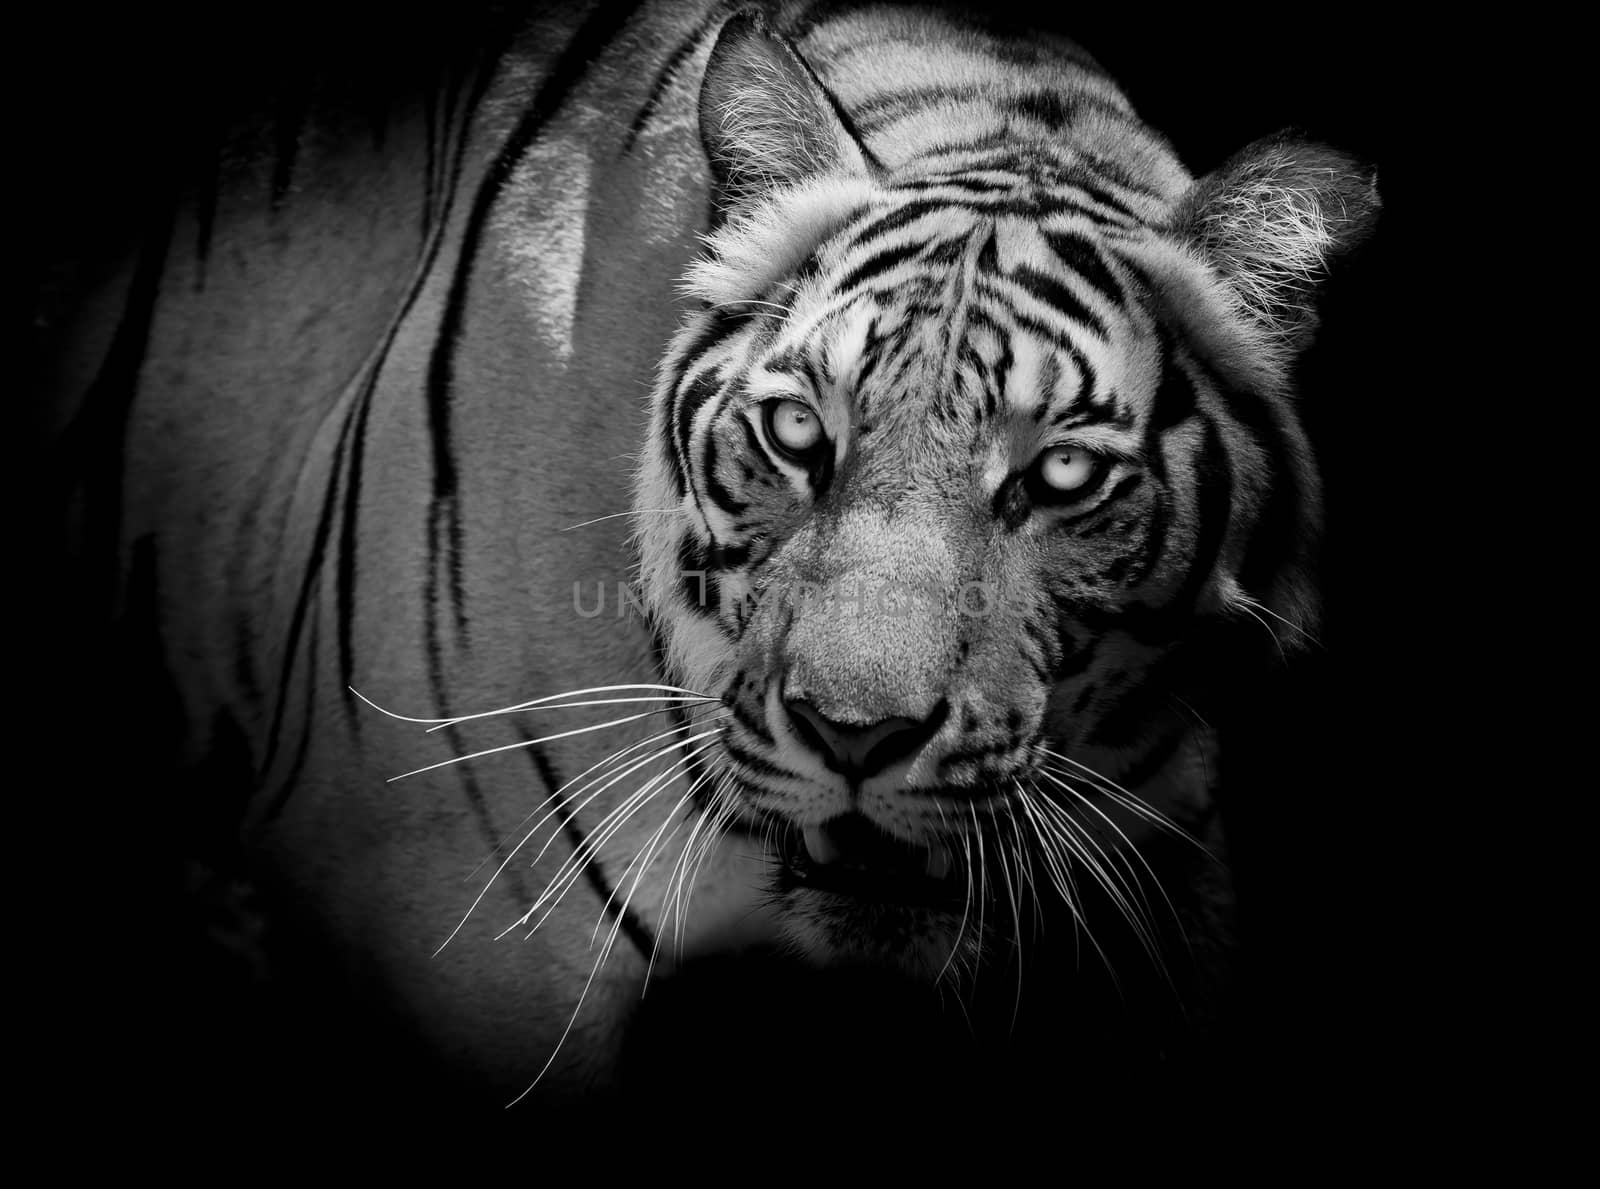 Black and White Tiger looking his prey and ready to catch it.